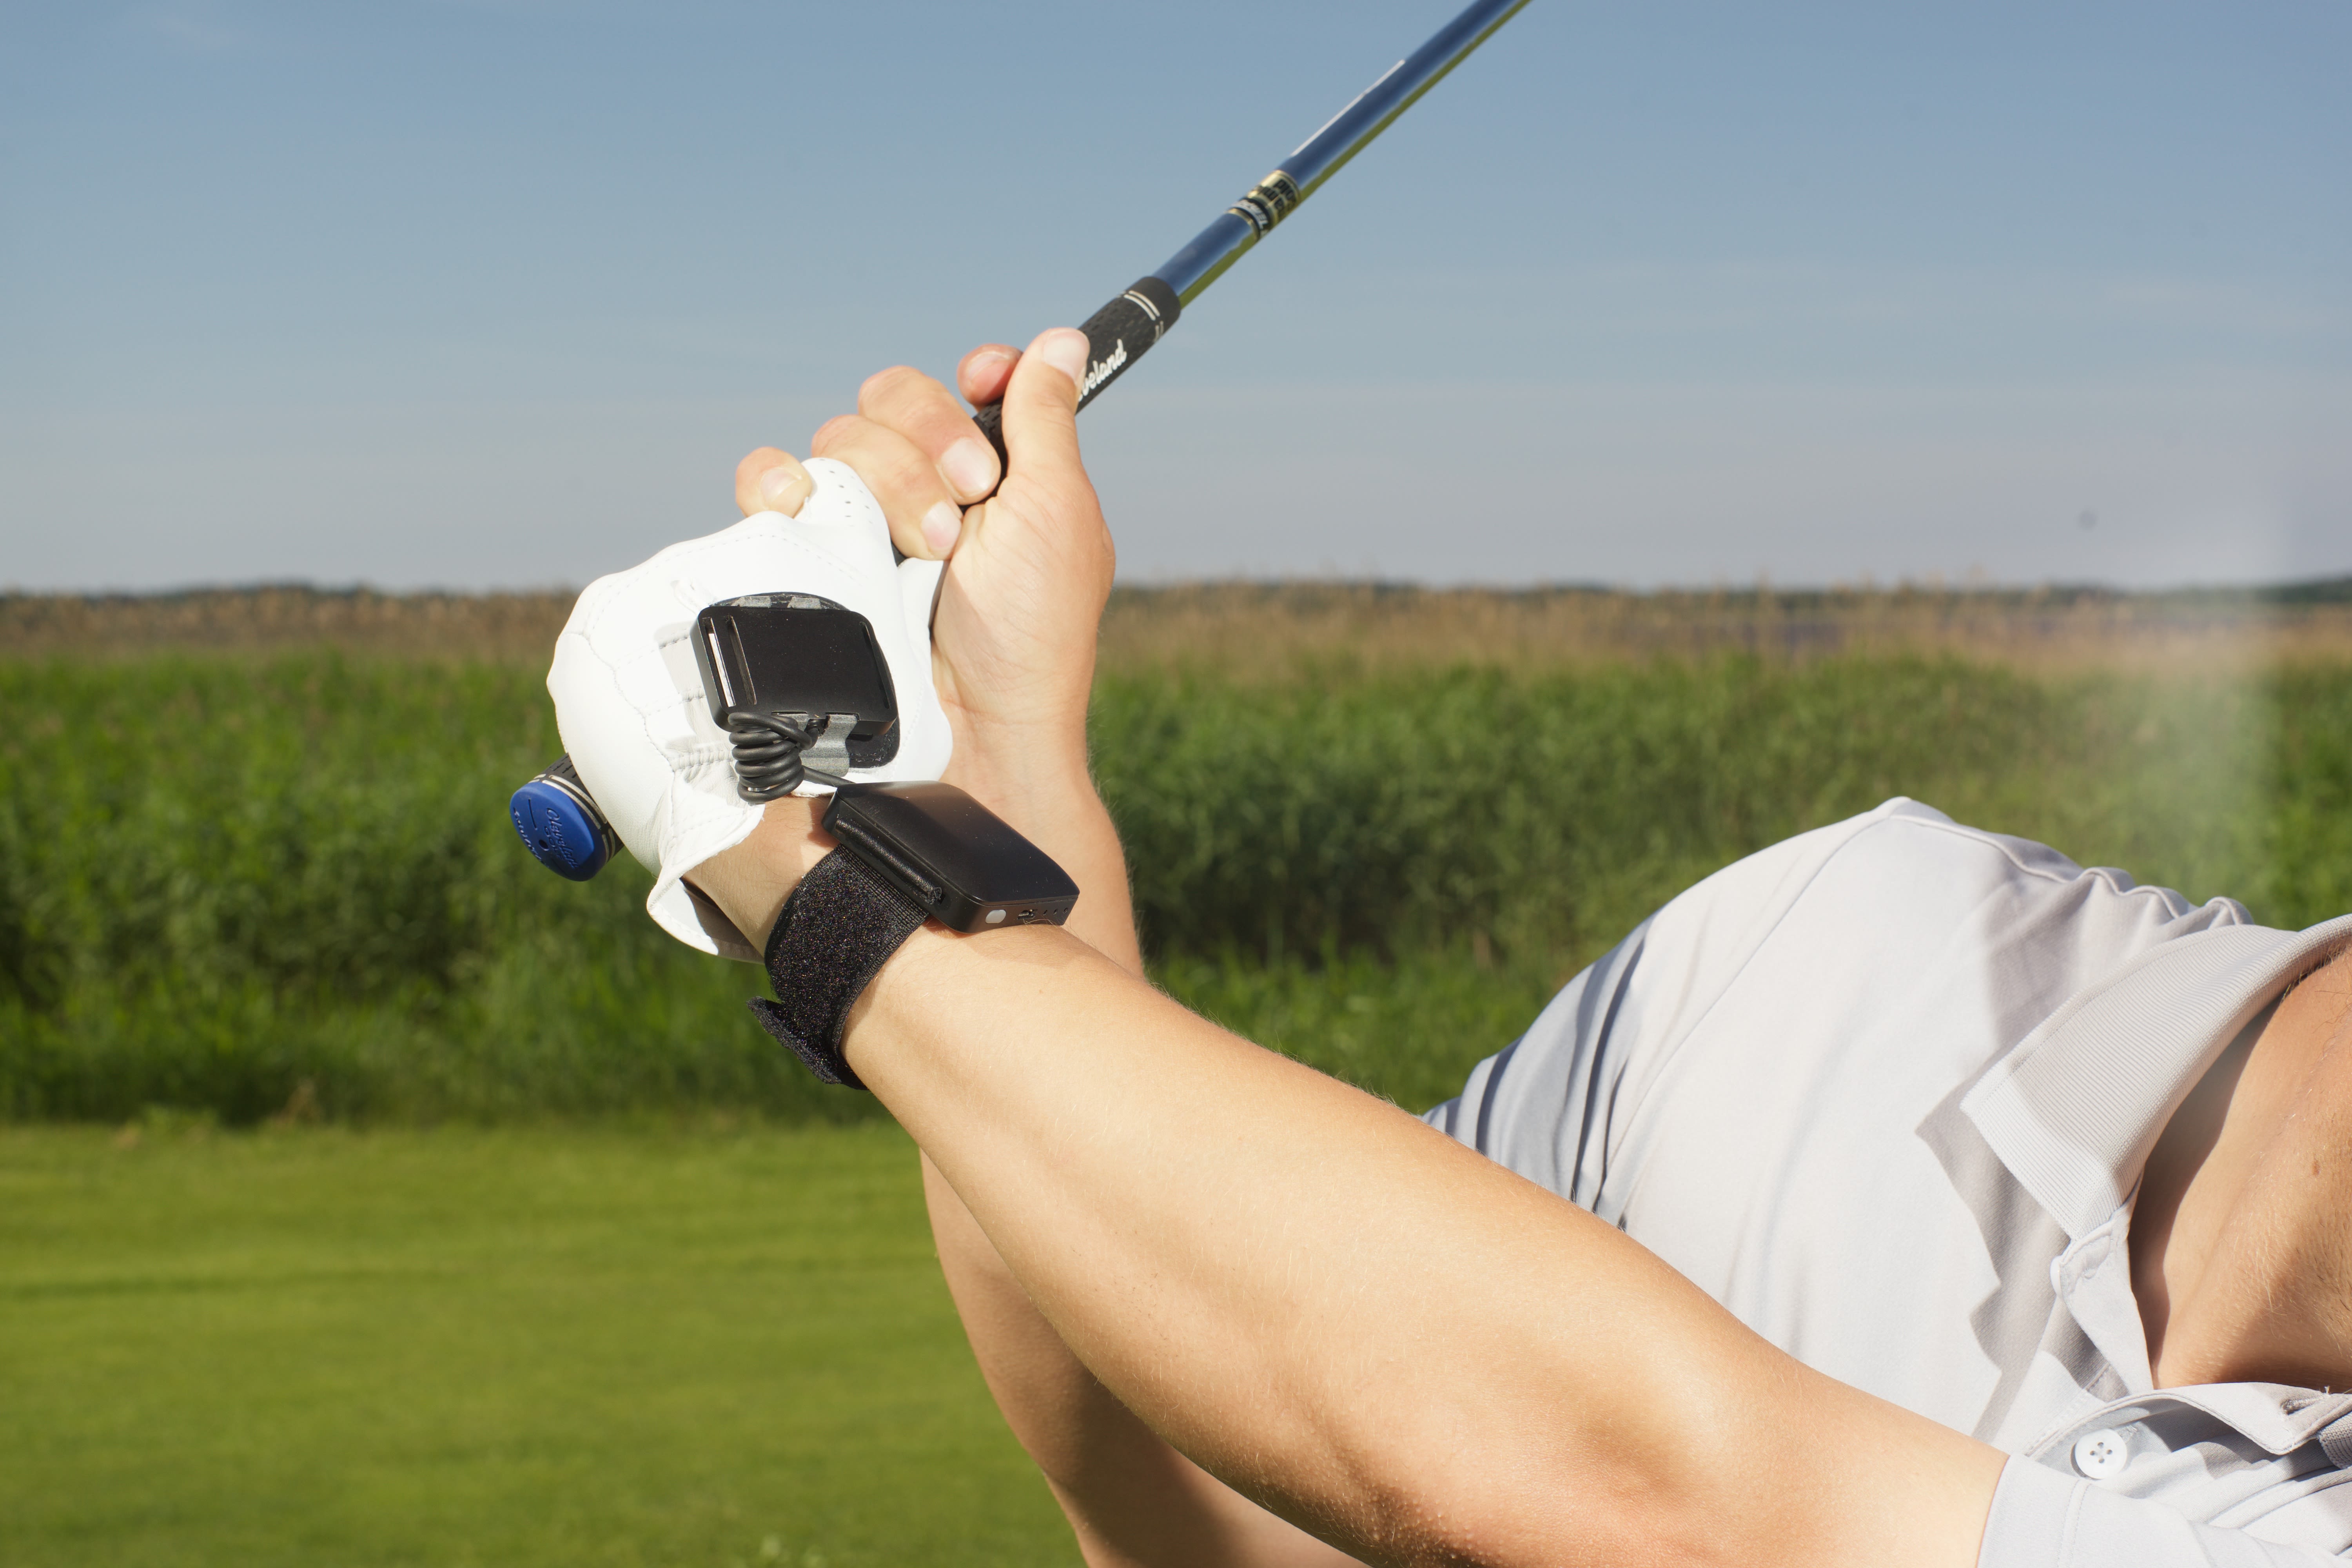 The HackMotion Golf Wrist Sensor focuses on optimizing wrist angles for better clubface control.